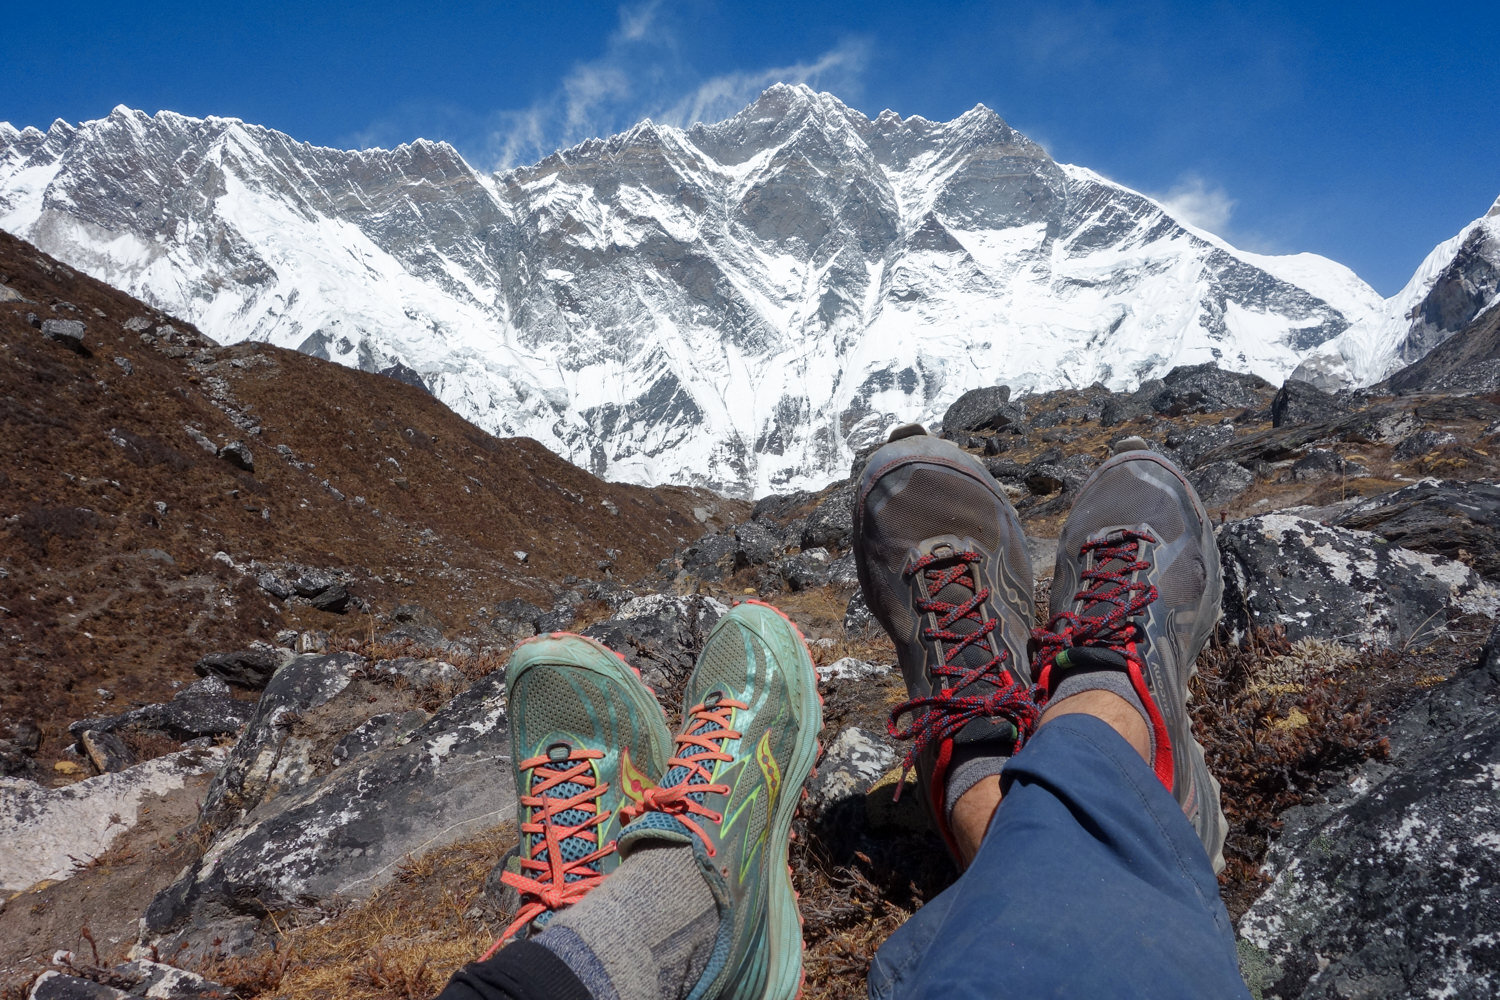 Rocking the super grippy Saucony Peregrines on the Everest 3 passes loop in Nepal